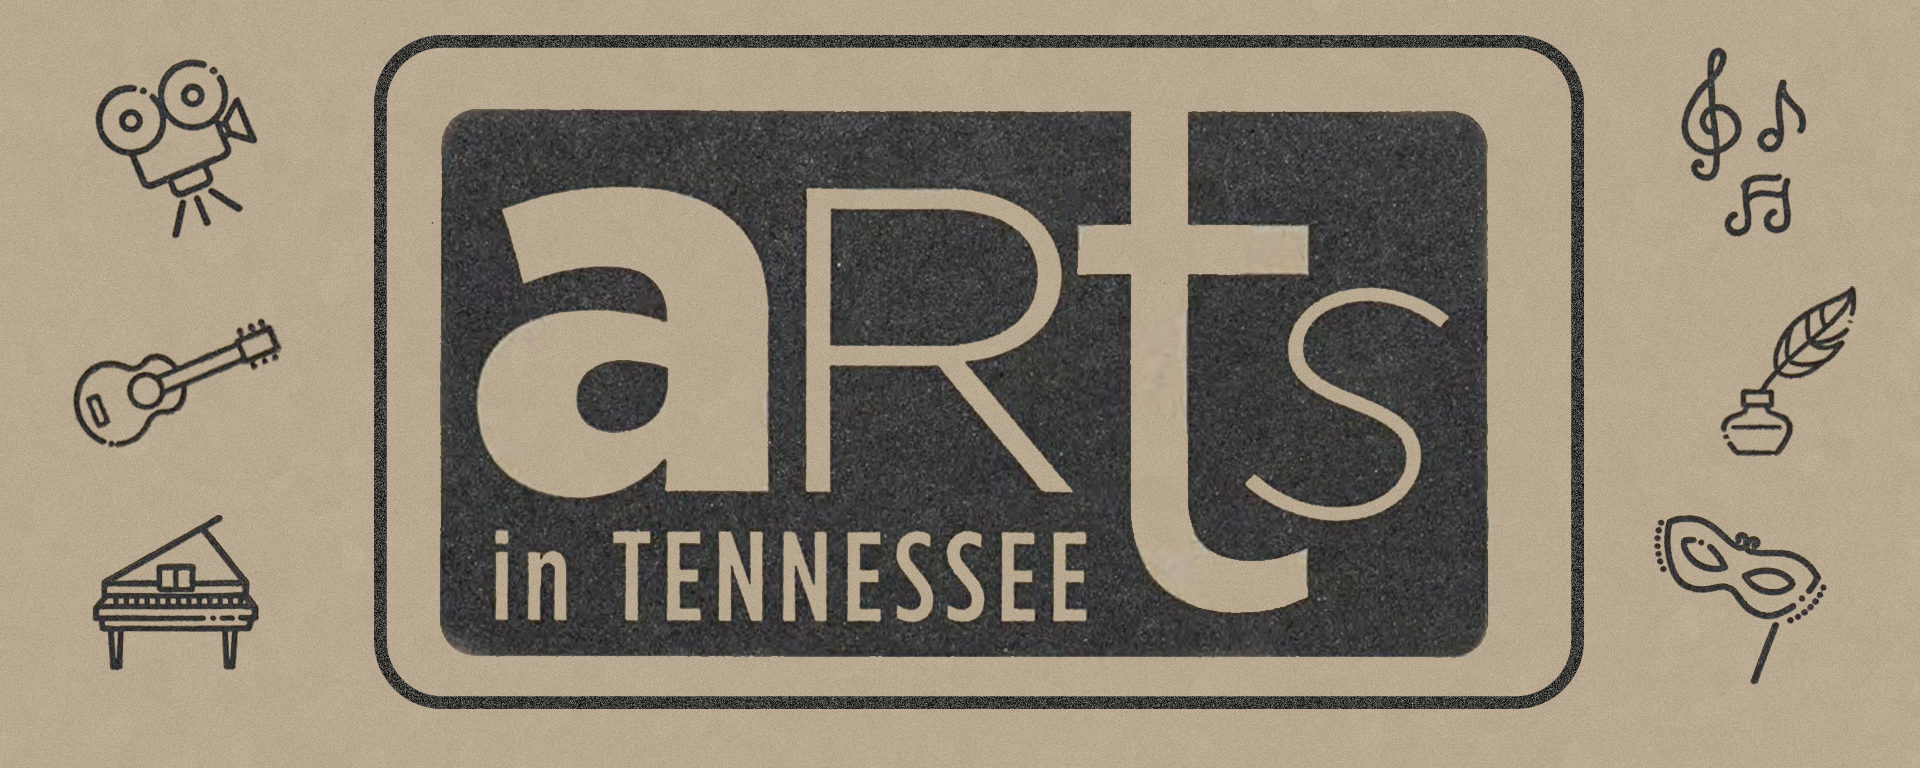 Arts in Tennessee